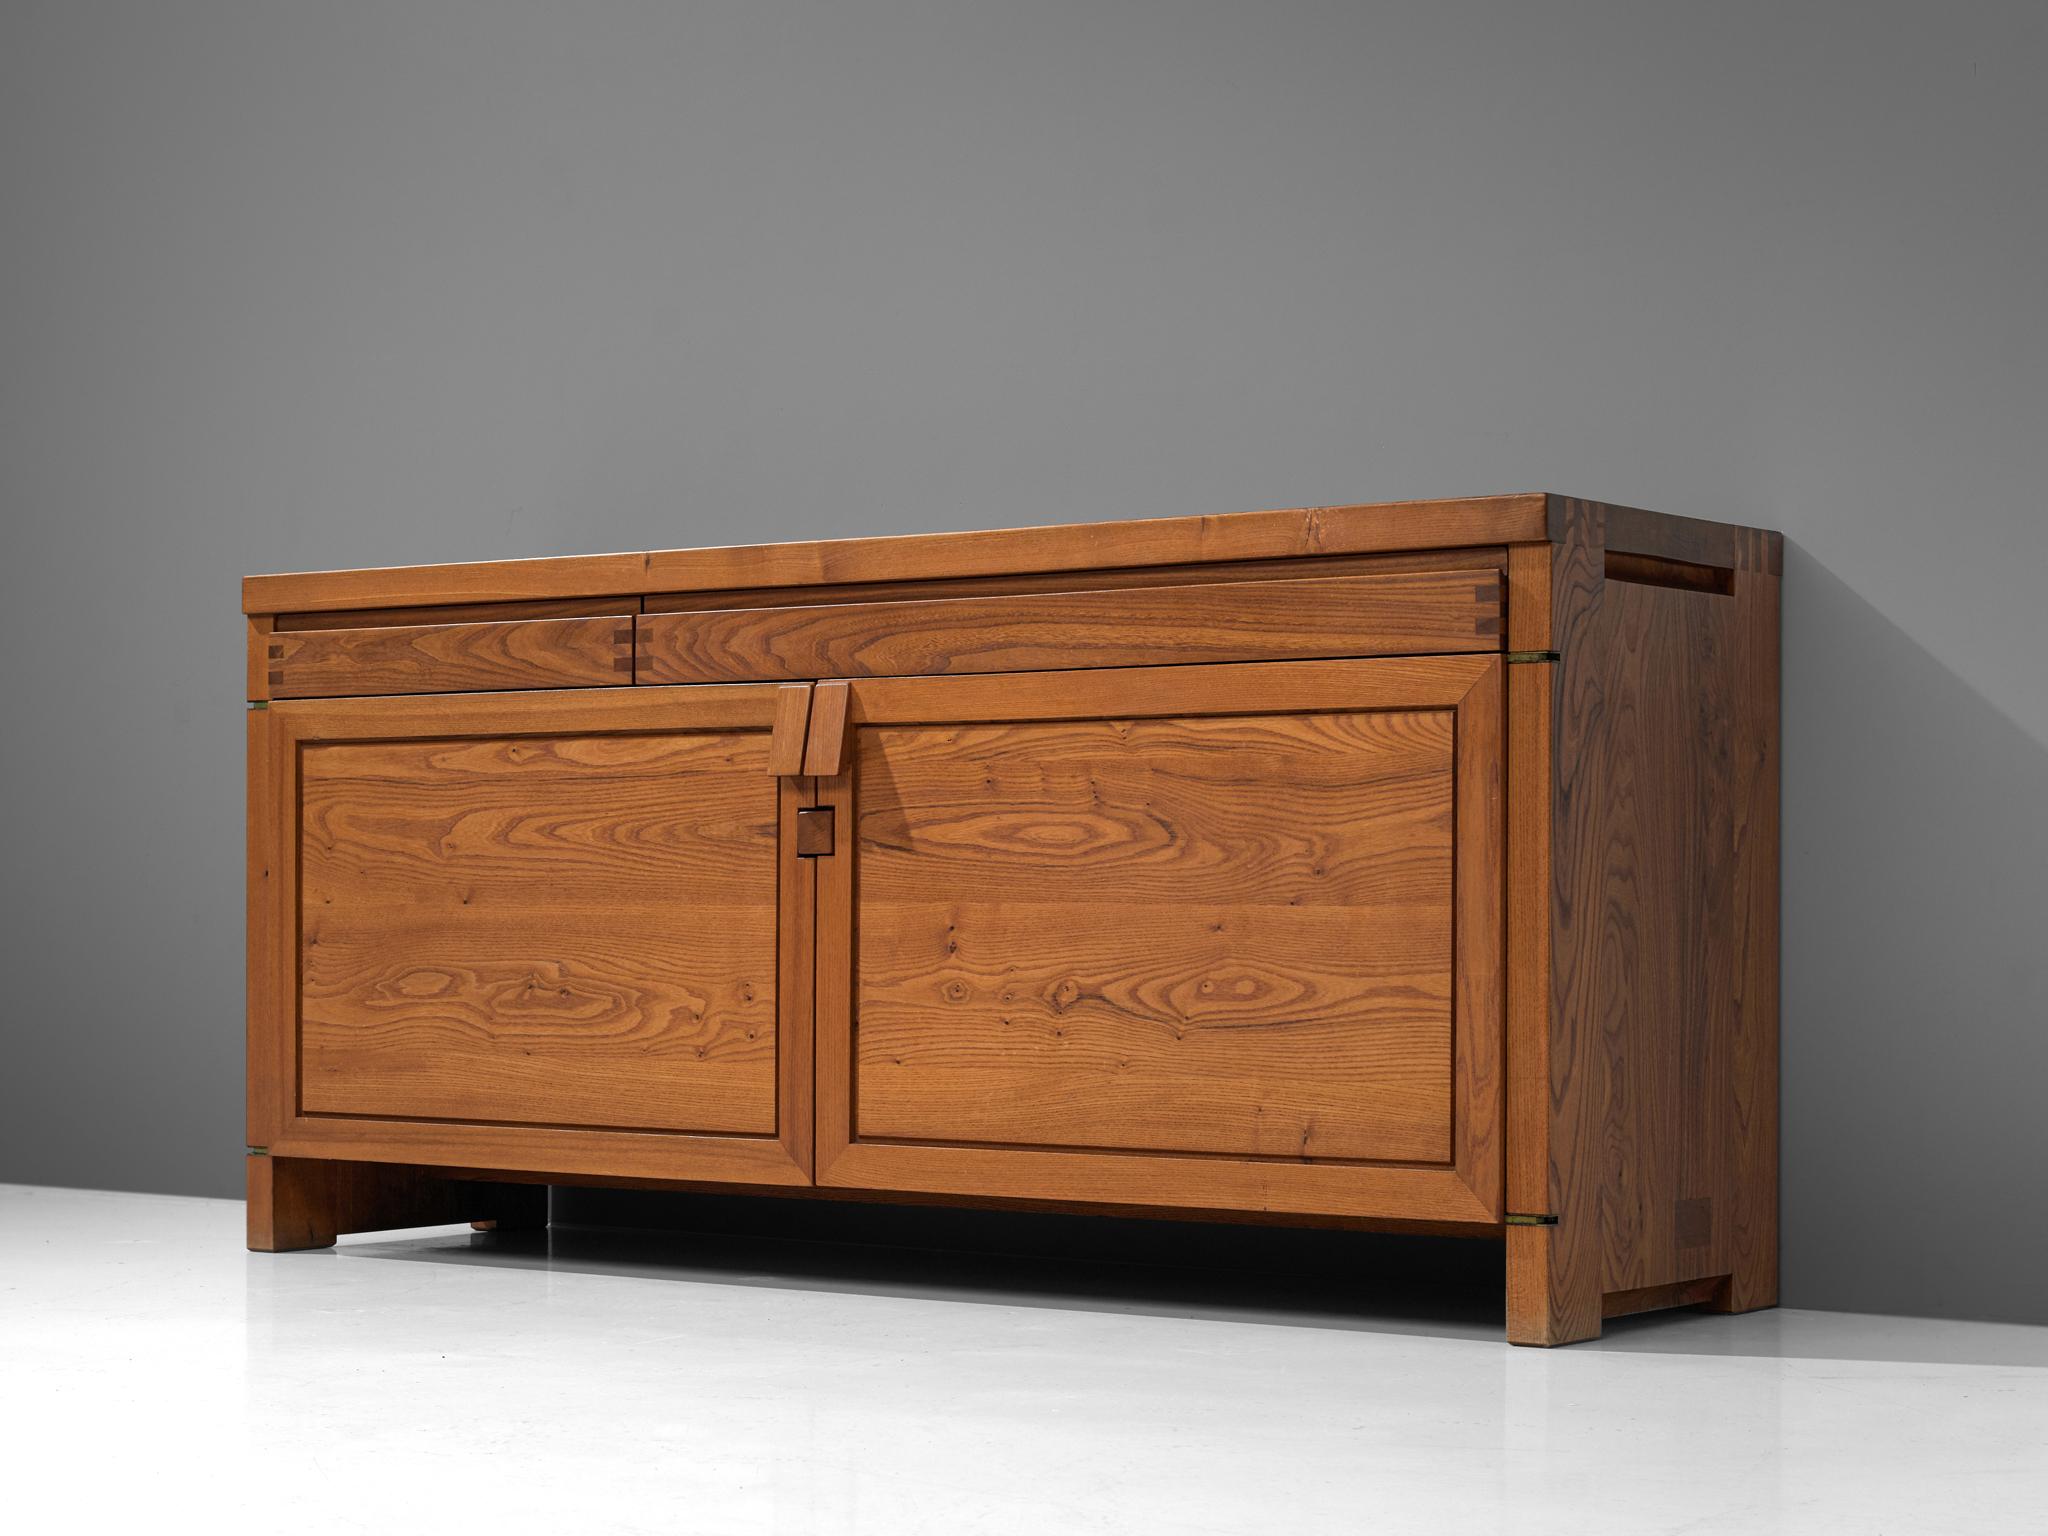 Pierre Chapo, sideboard, Model R08, elm, France, circa 1964.

This exquisitely crafted credenza combines a simplified yet complex design combined with nifty, solid construction details that characterize Chapo's work. The well-proportioned doors